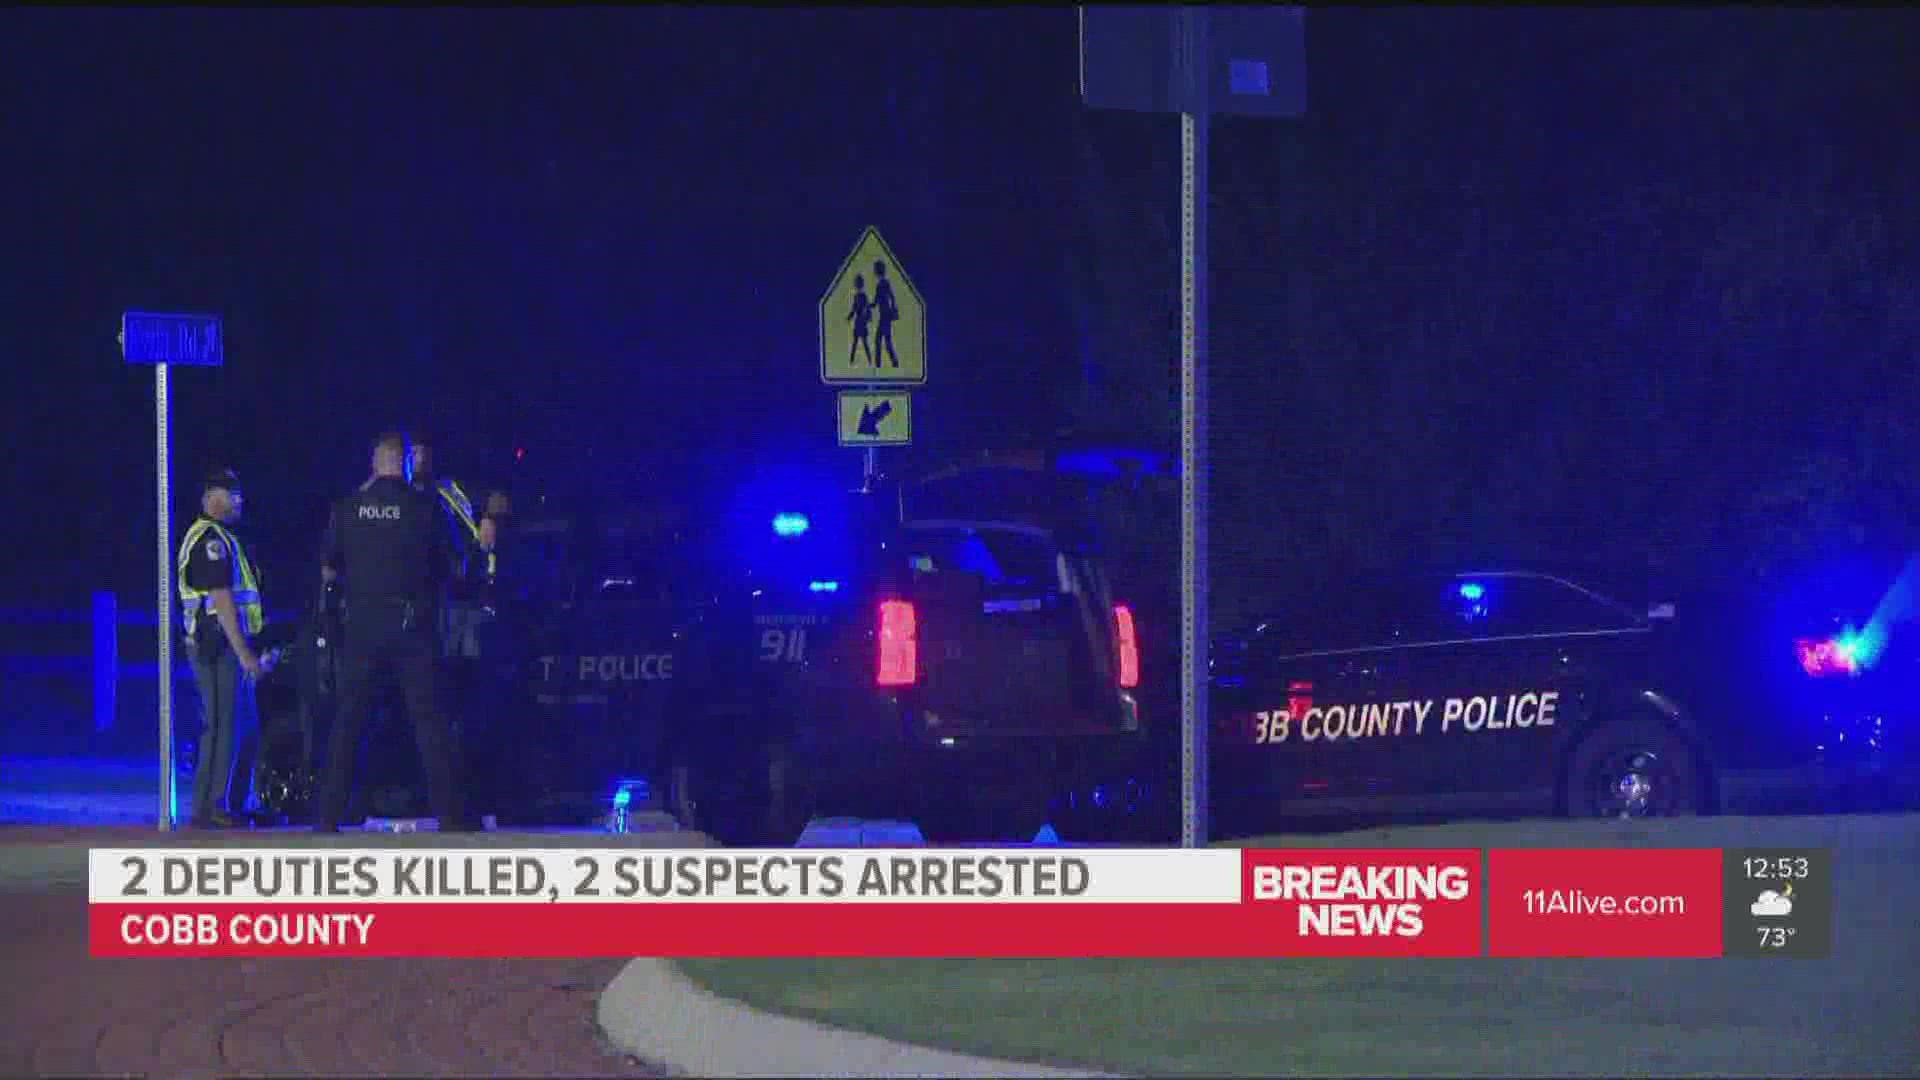 According to the Cobb County Sheriff, the deputies were ambushed while serving a warrant.